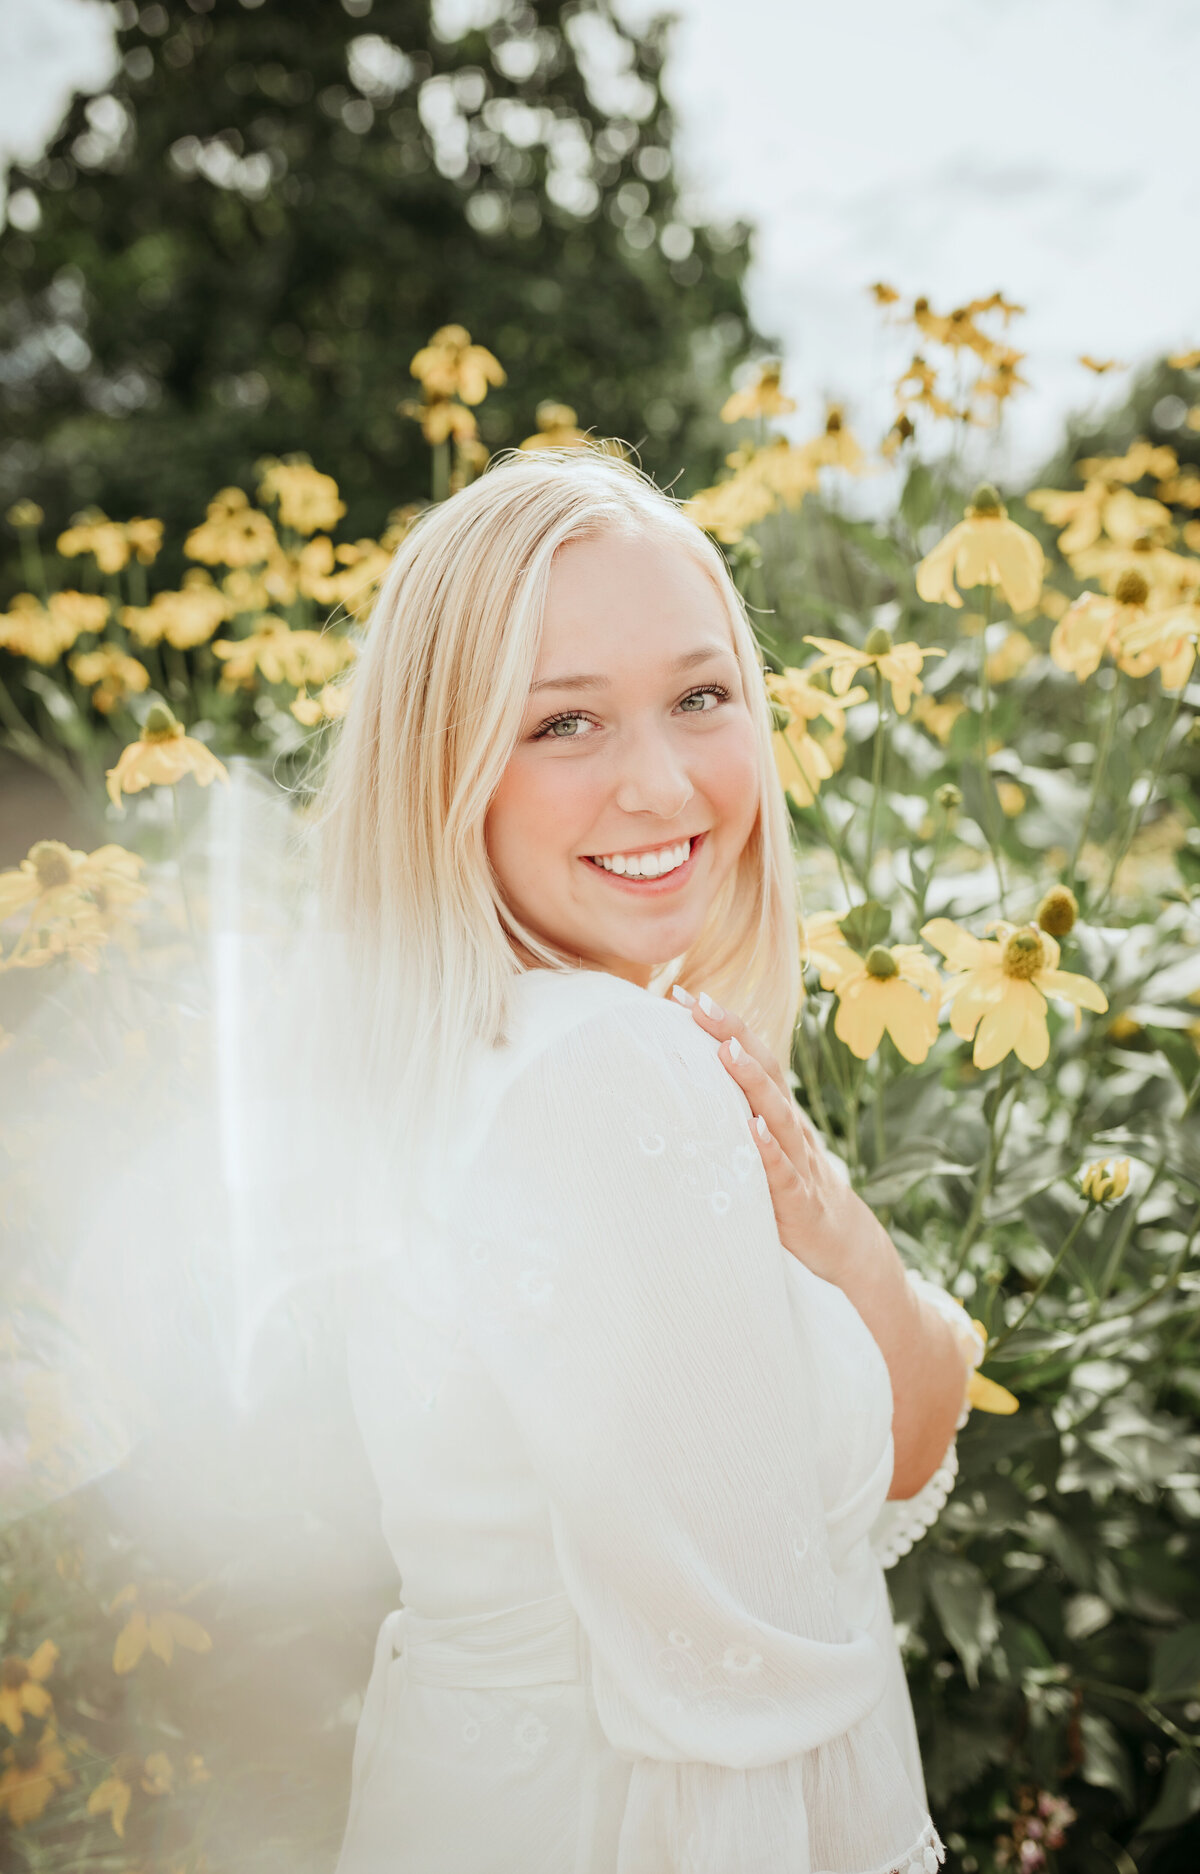 Step into enchanted evenings with senior portraits set in dreamy, ethereal settings. Shannon Kathleen Photography transforms your senior year into a fairytale. Schedule your session.